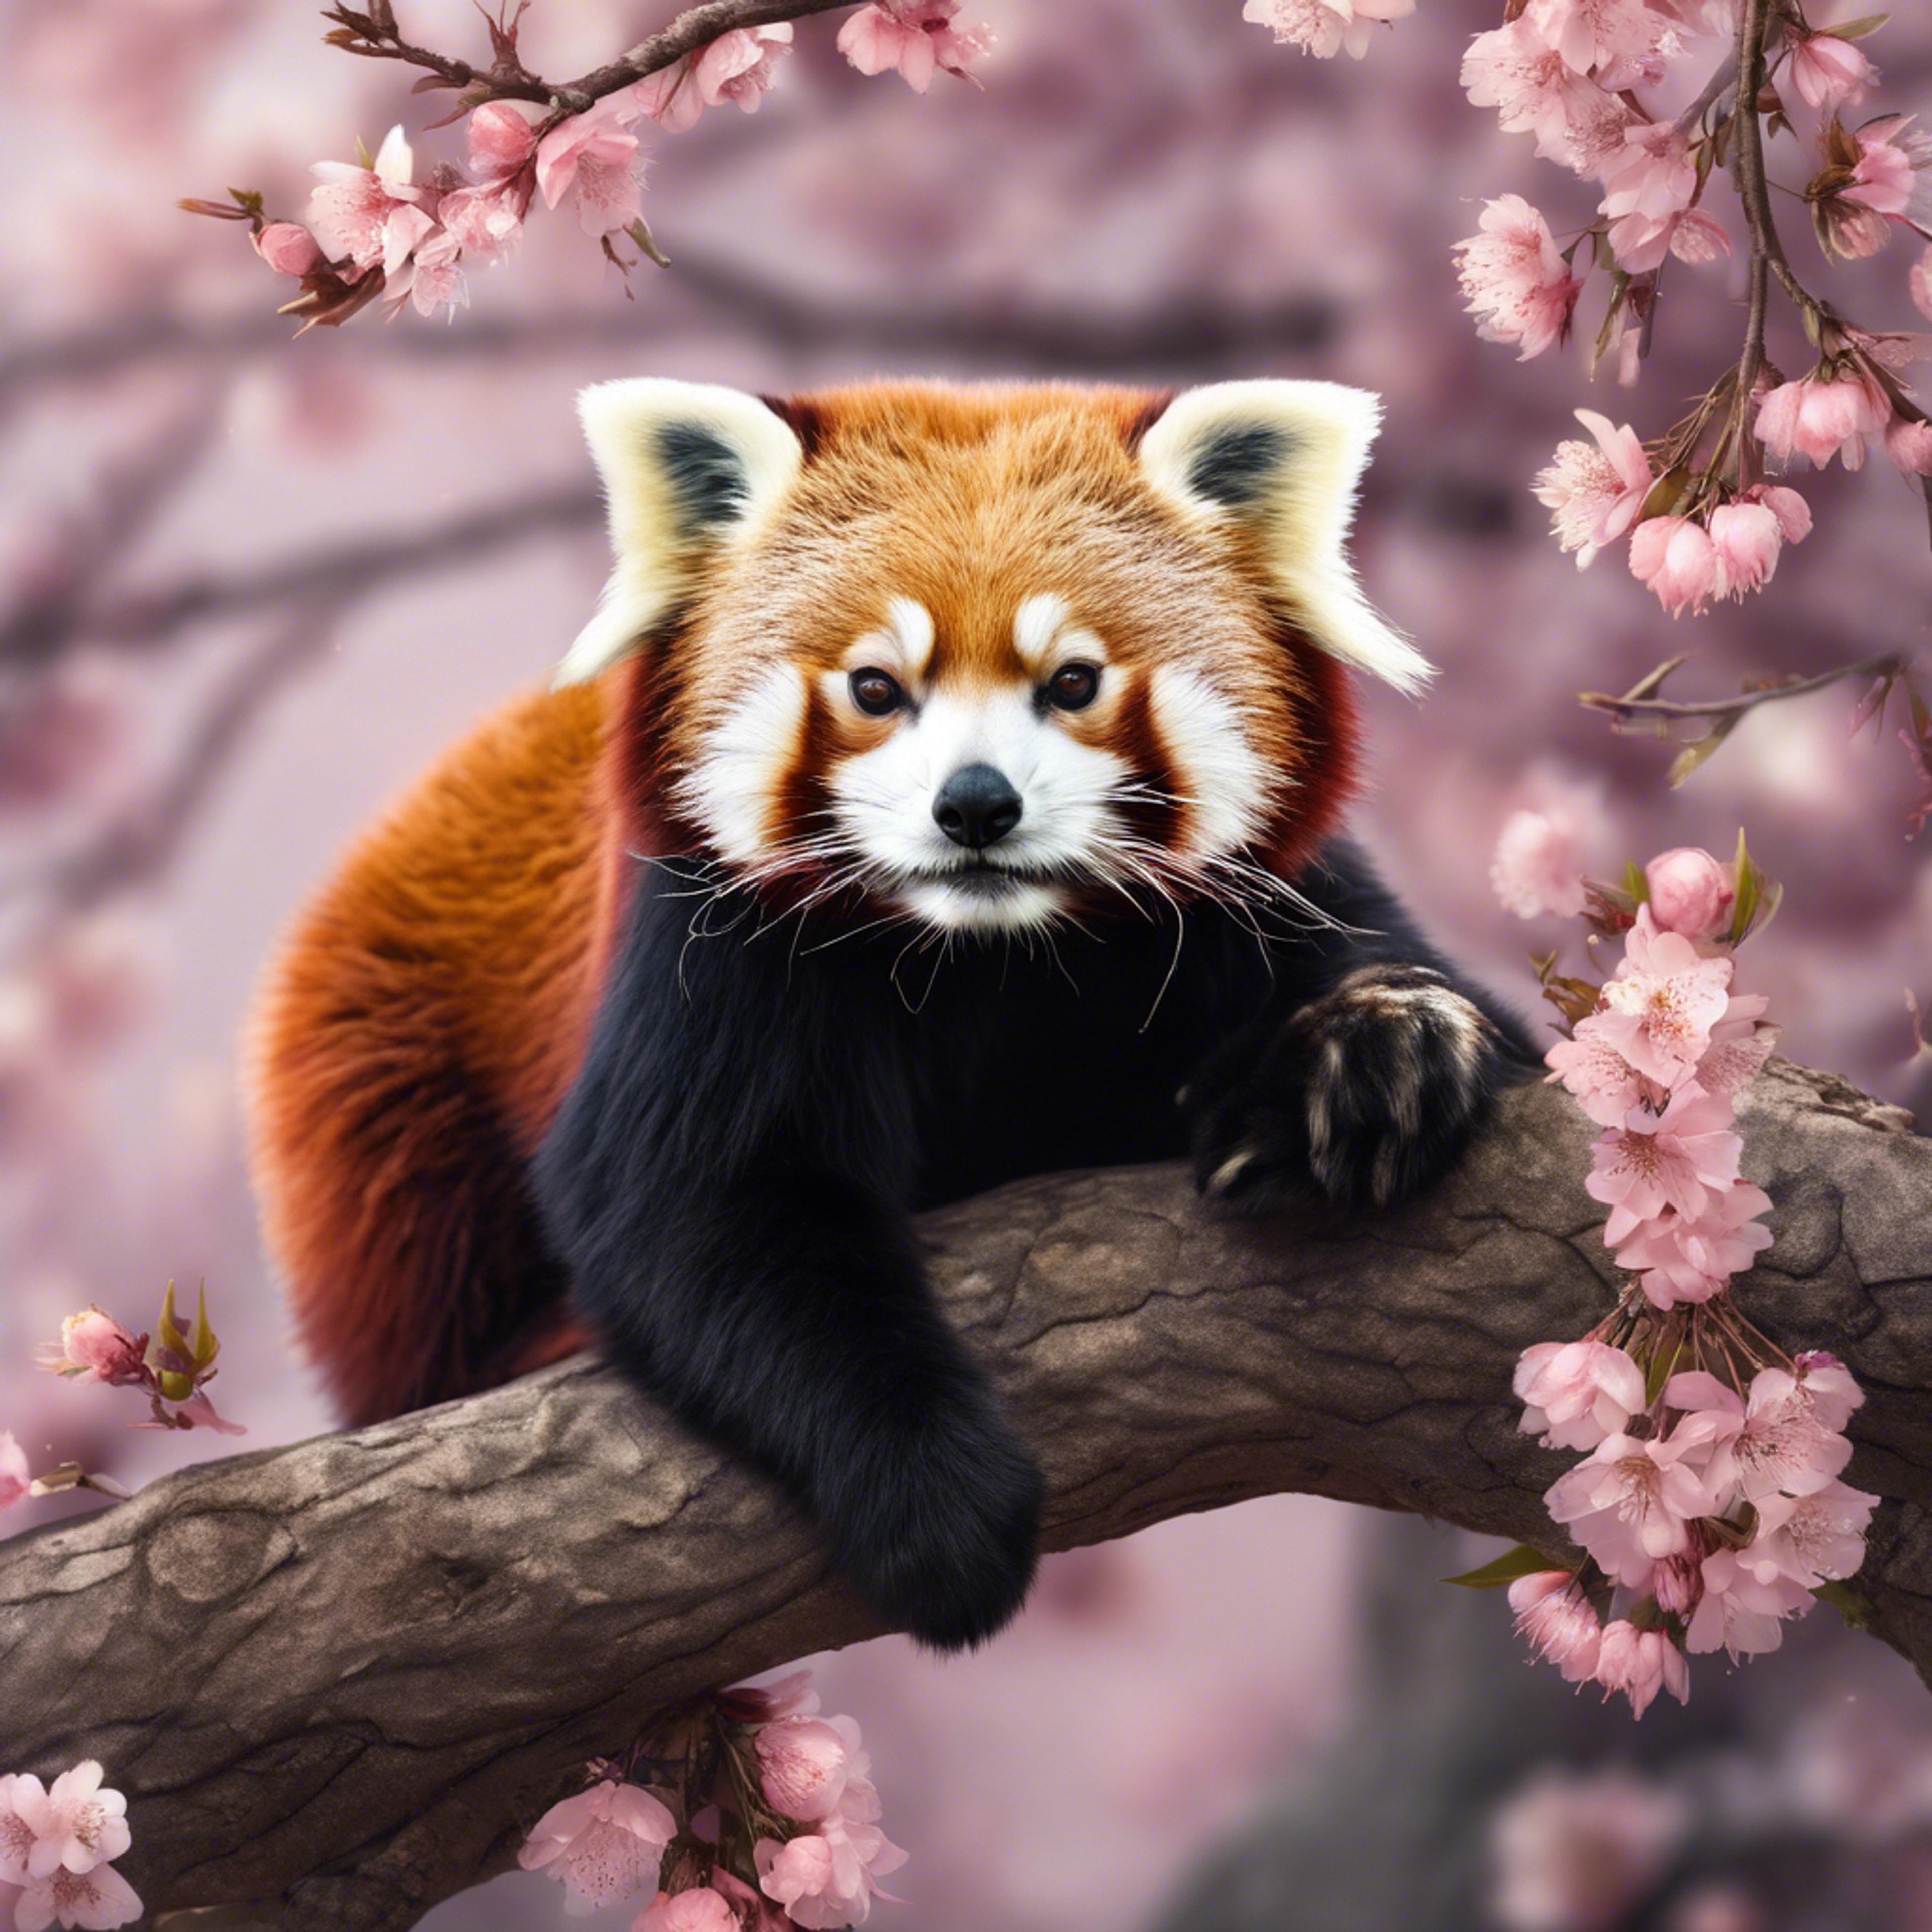 A red panda lounging lazily on a tree branch with a backdrop of blooming cherry blossoms. Tapet[422b6dc9464b43ba80b6]